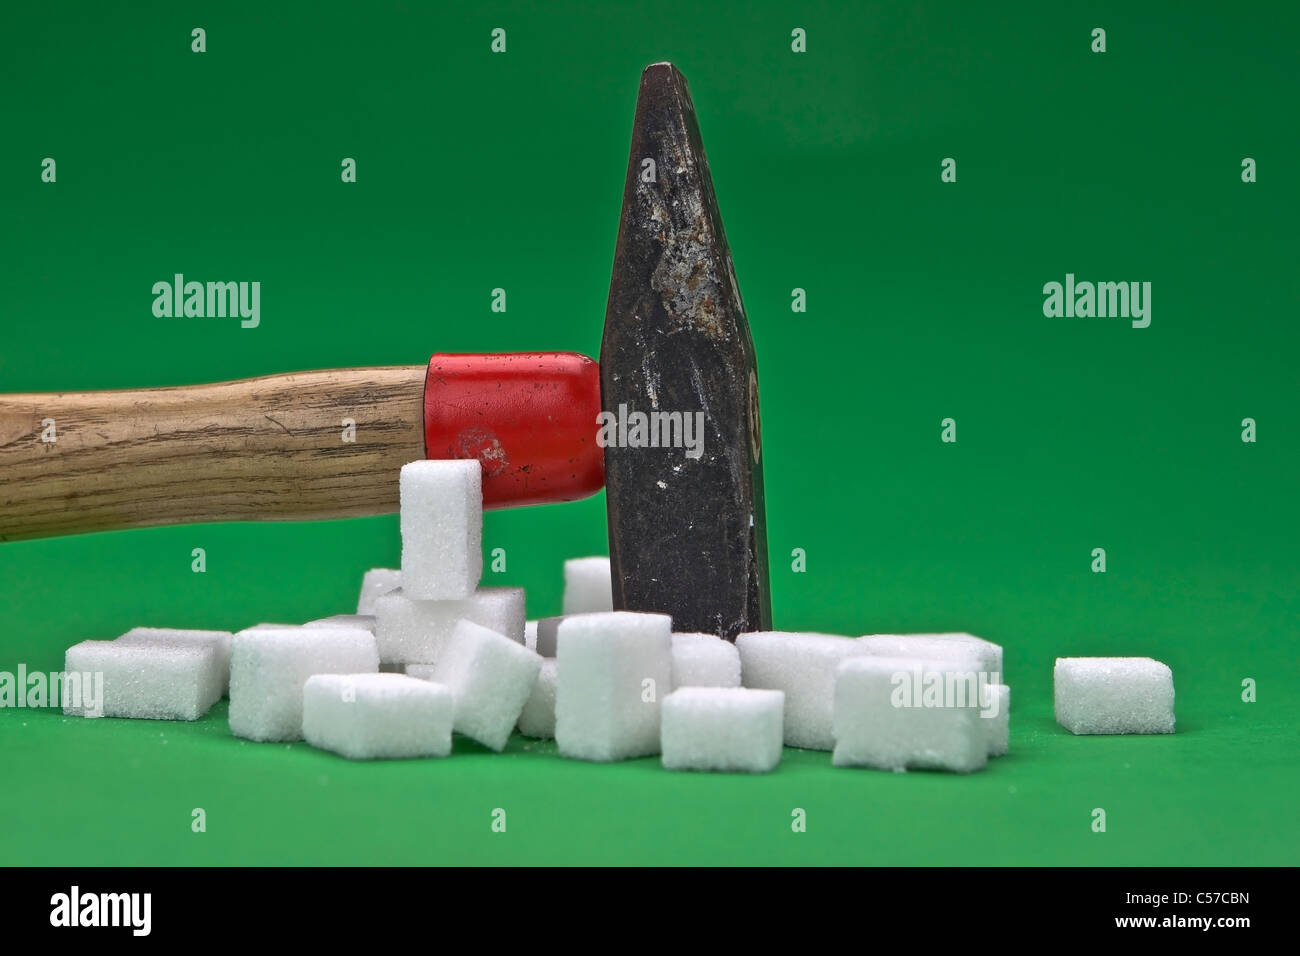 a hammer which is disturbing sugar cubes for a healthier nutrition in the future Stock Photo